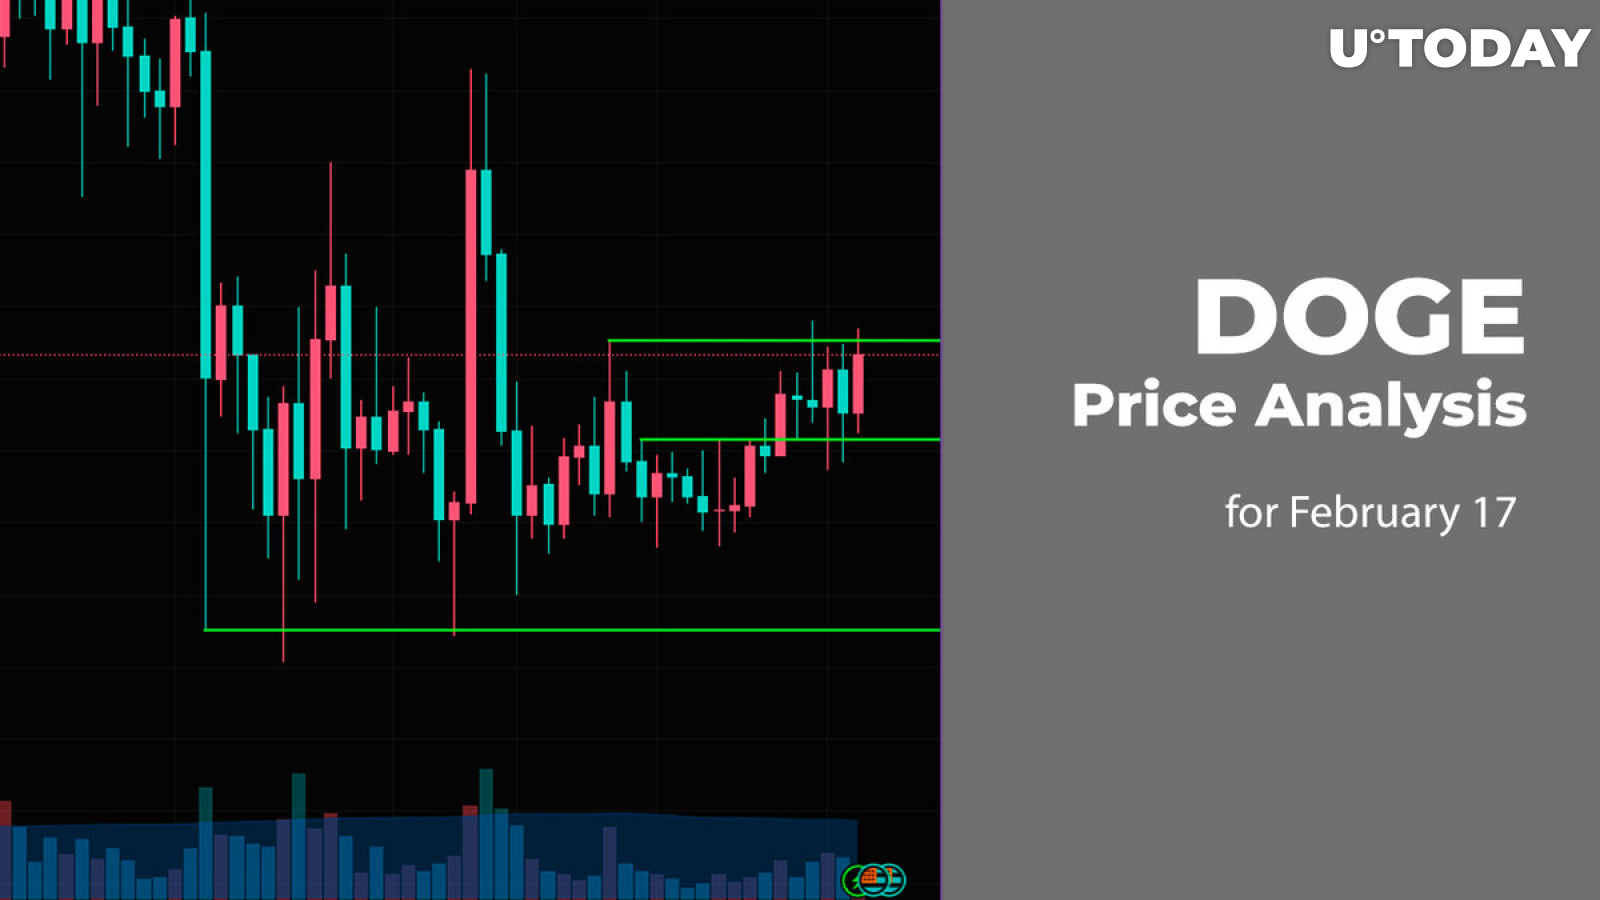 DOGE Price Prediction for February 17